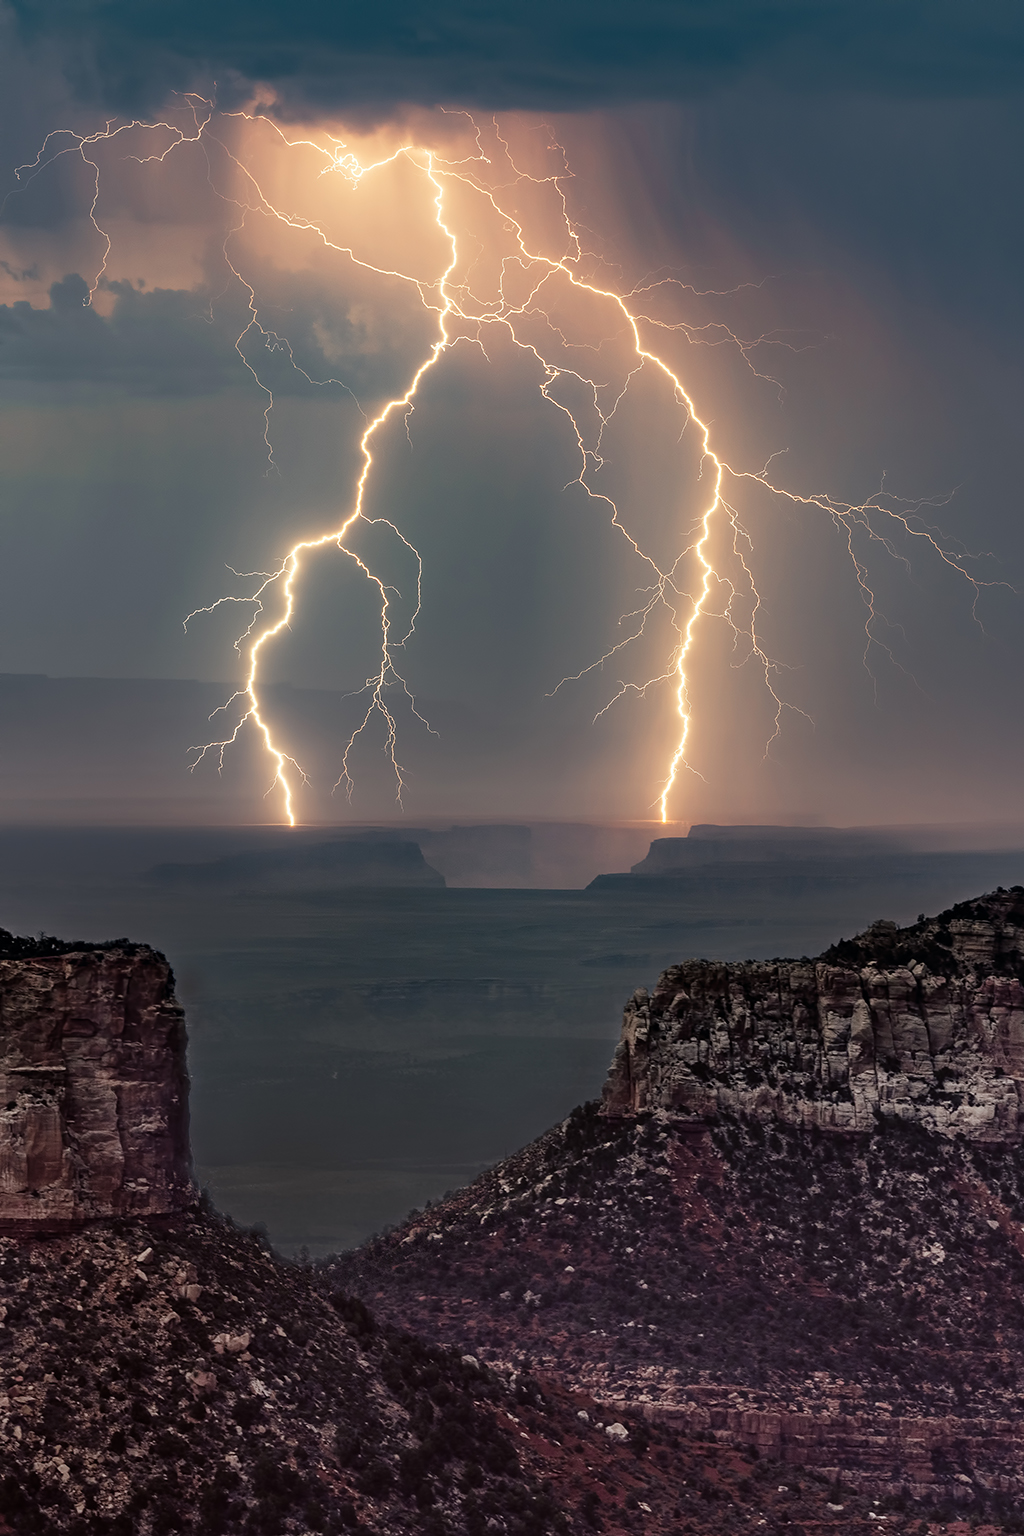 Example of using a telephoto lens to photograph lightning.